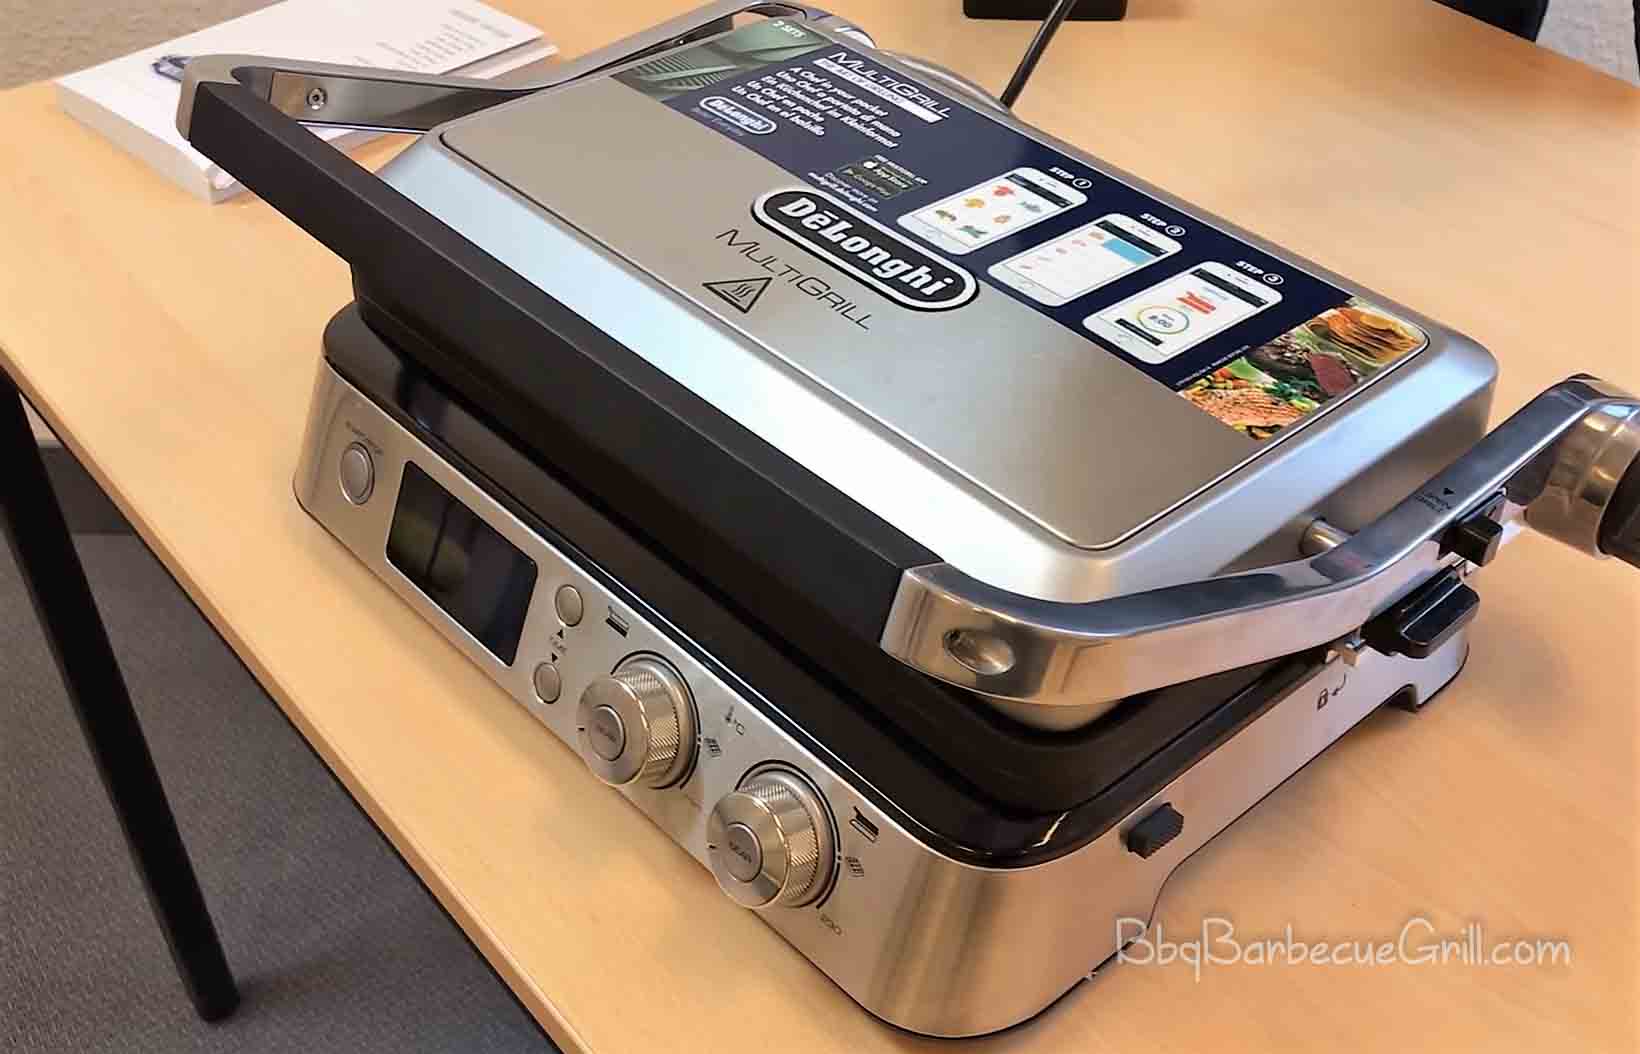 DeLonghi America CGH1020D Livenza All Day Combination Contact Grill and Open Barbecue